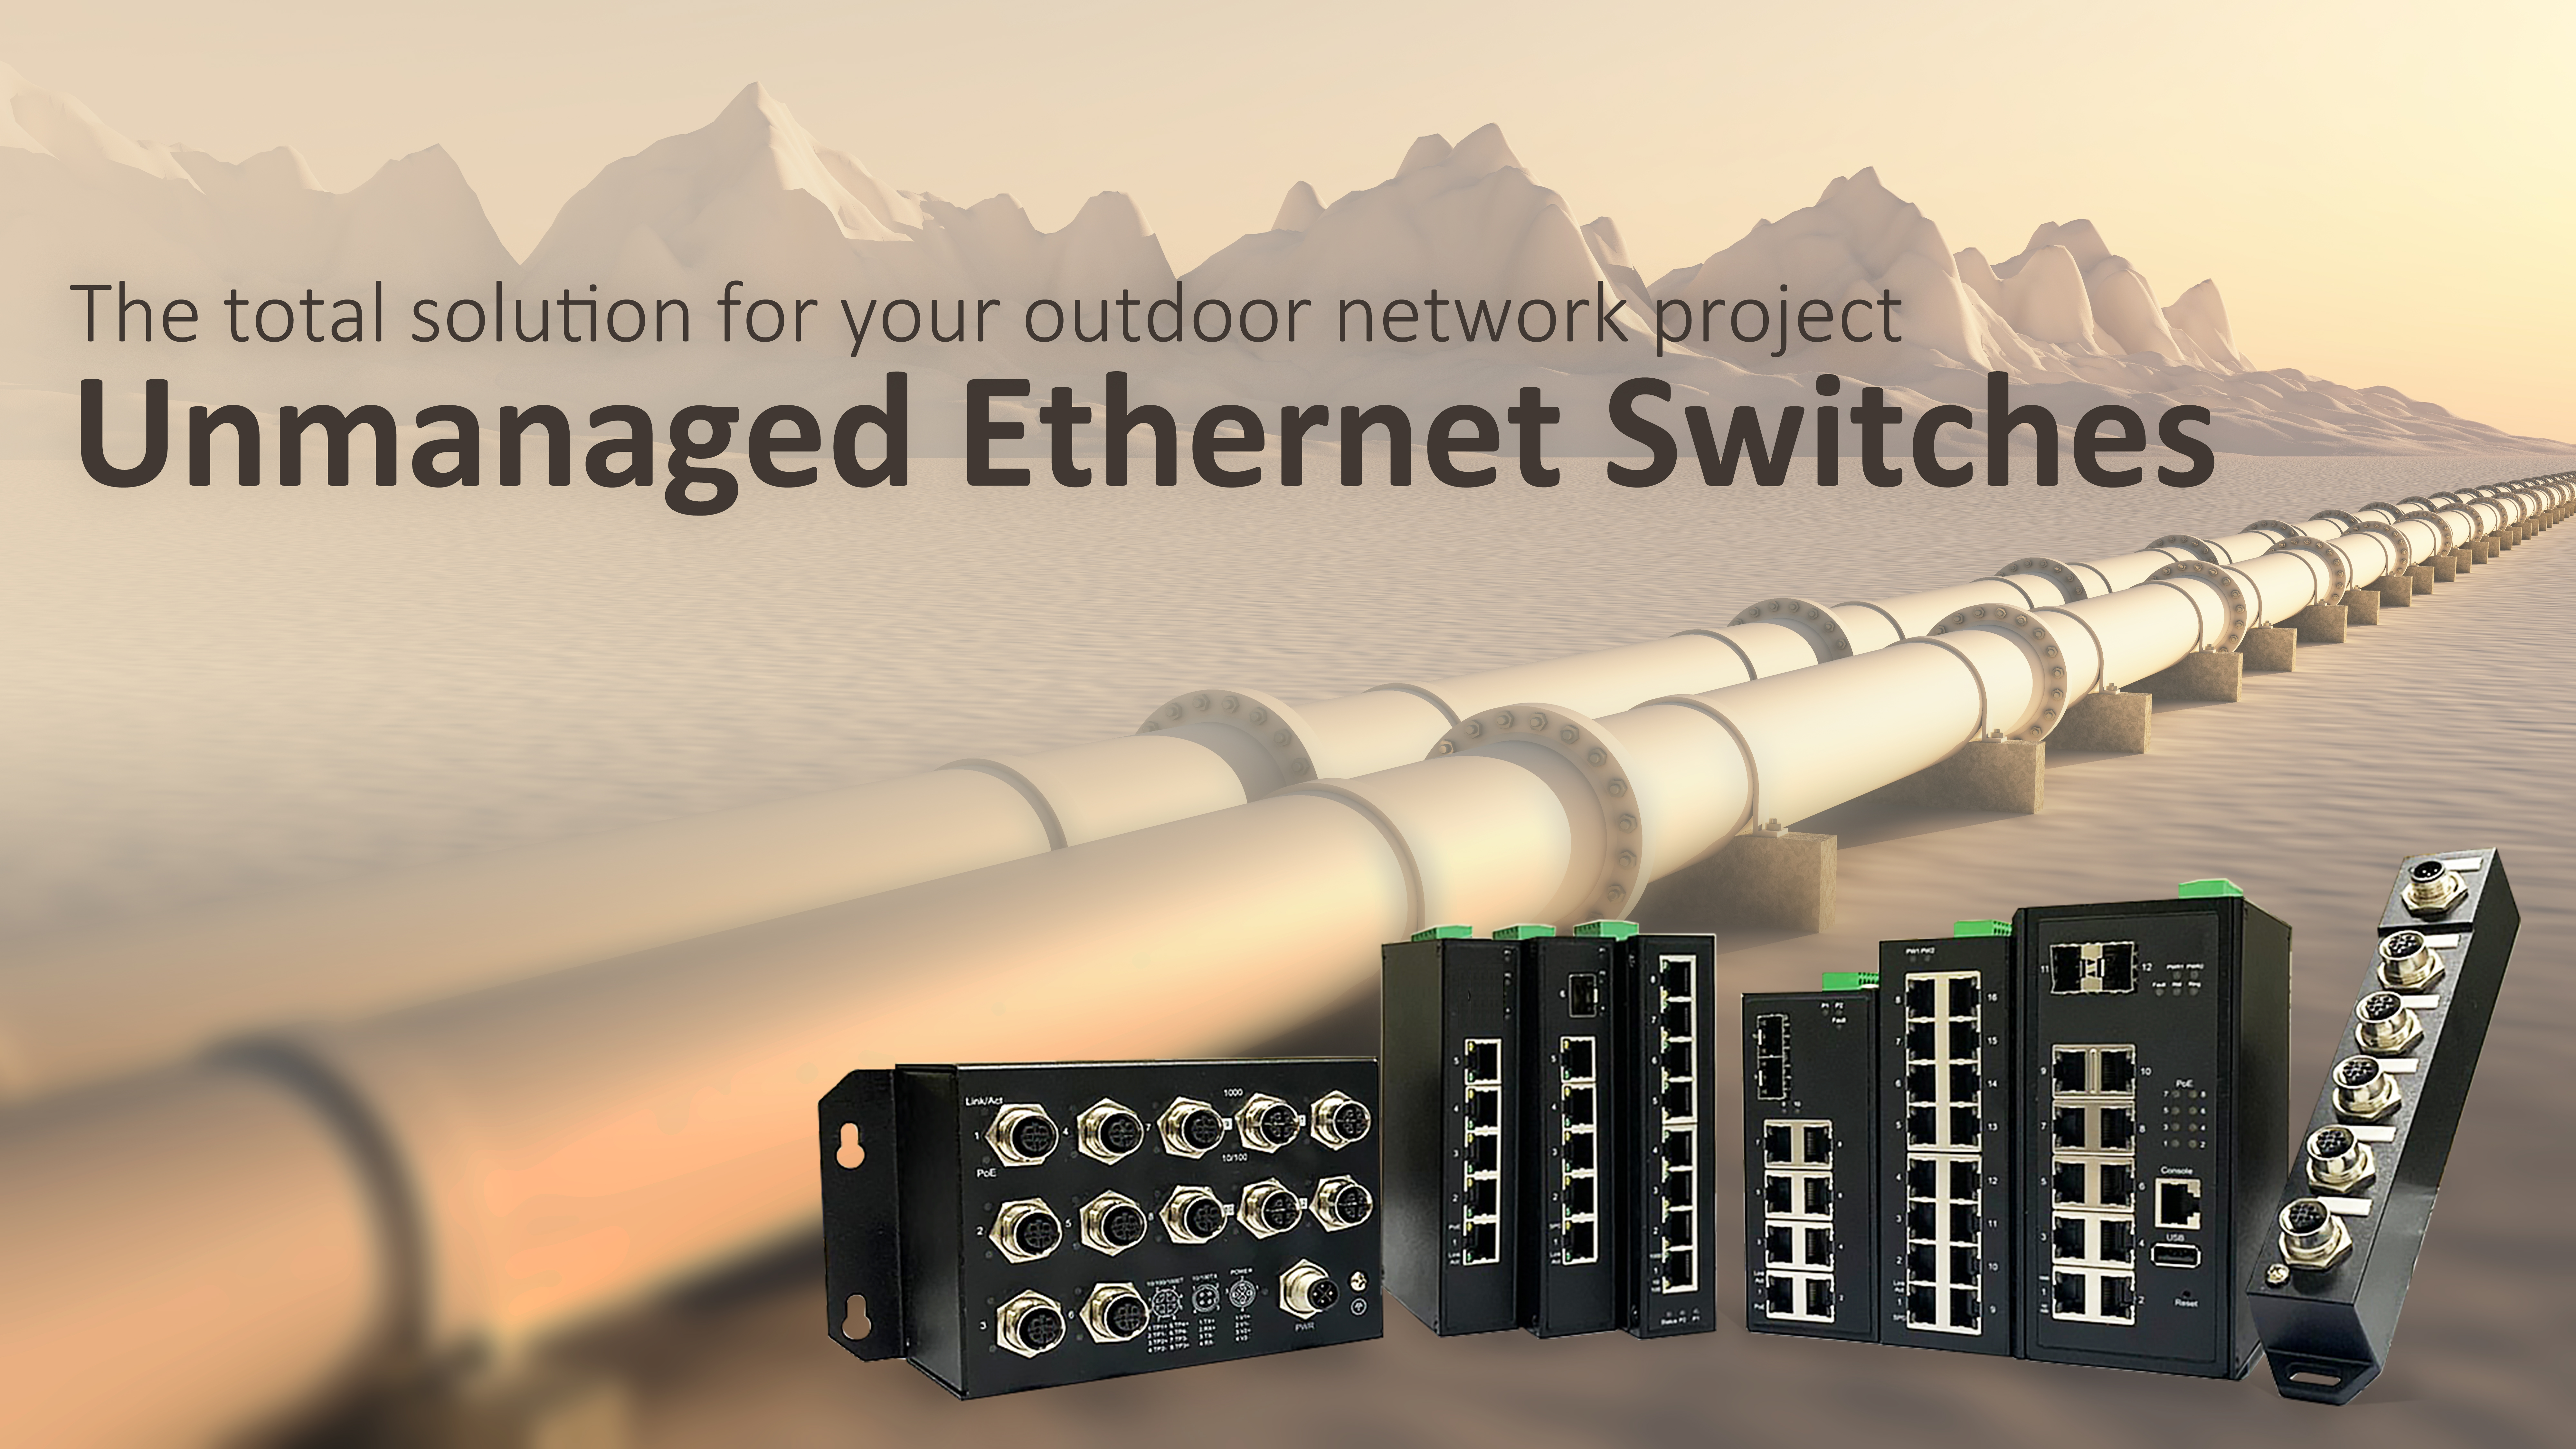 The totle solution for your outdoor network project - Unmanaged Ethernet Switches 